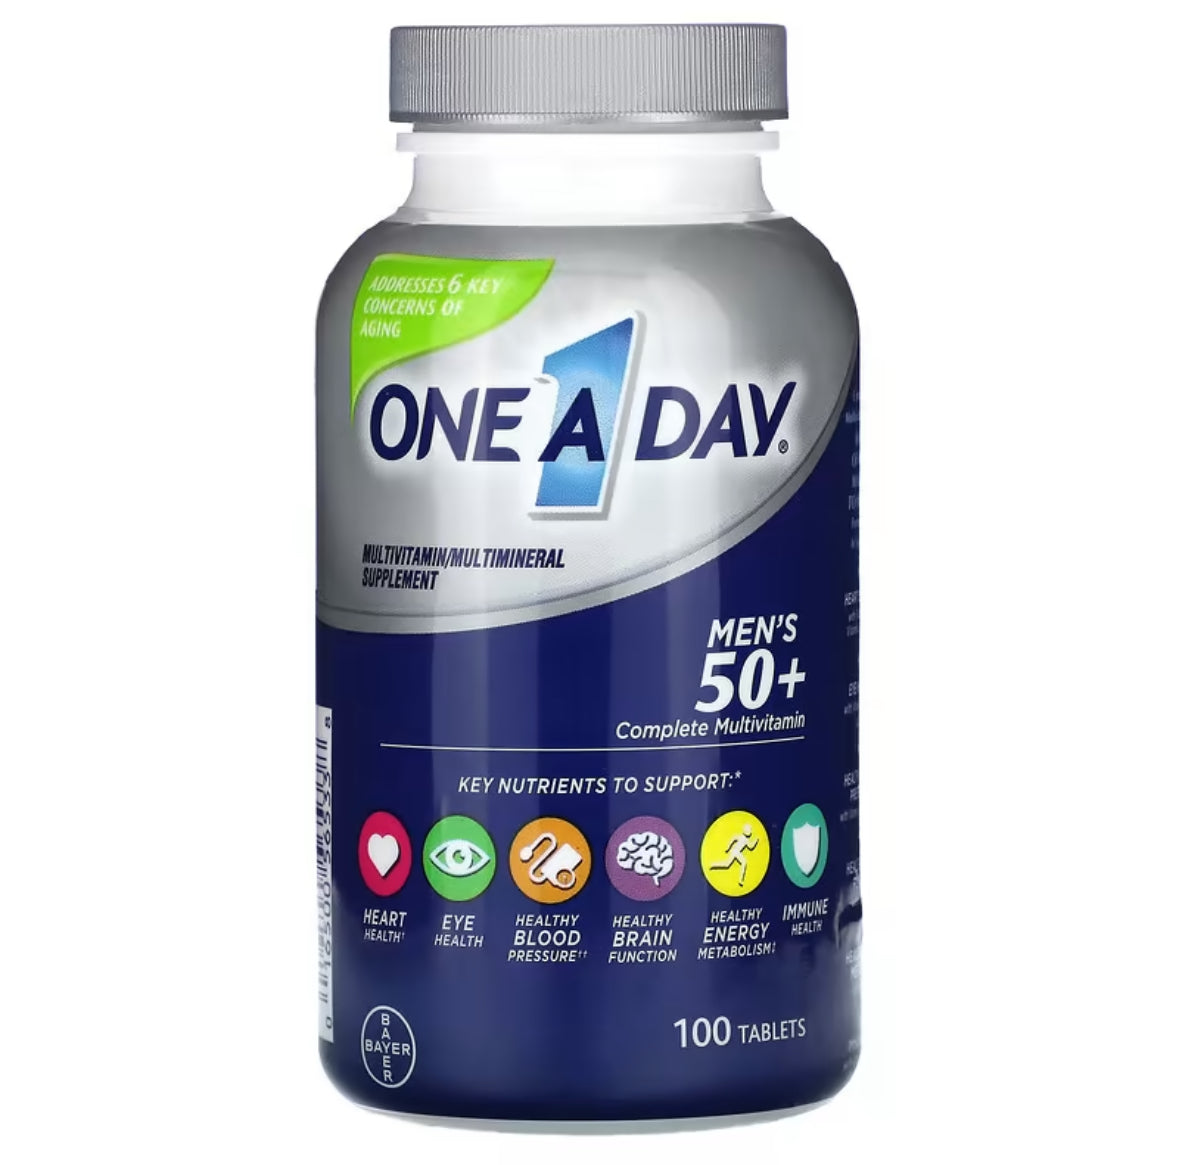 ONE A DAY MEN’S 50+ COMPLETE MULTIVITAMIN, 100 TABLETS